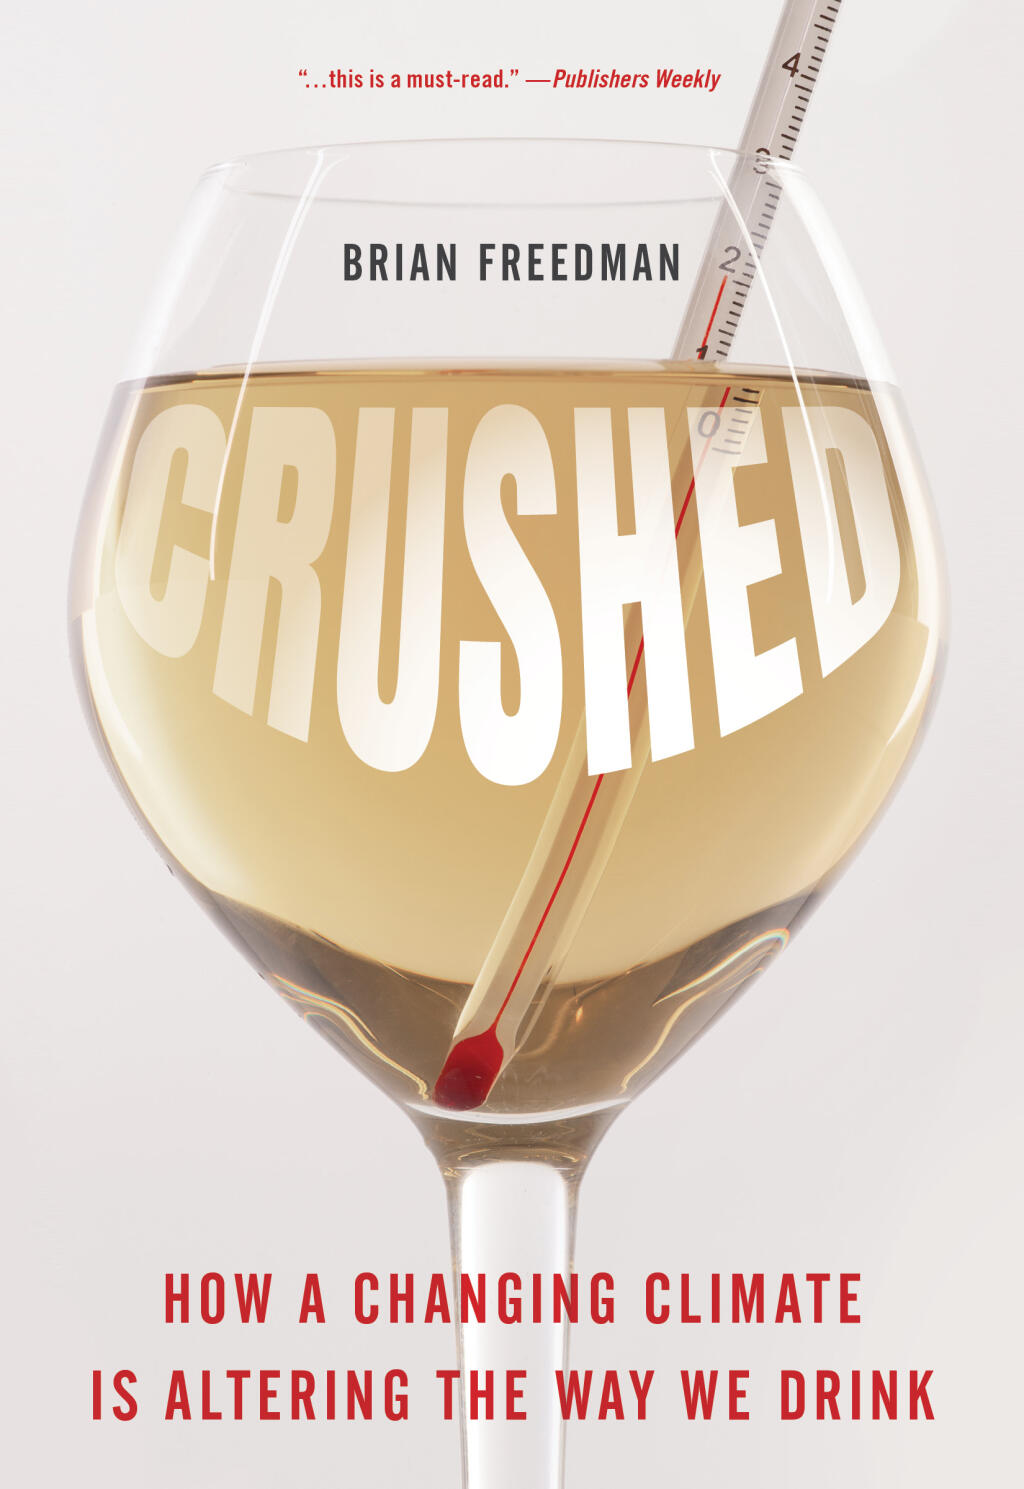 A new book on the market — “Crushed” — offers pragmatic optimism. (Brian Freedman)